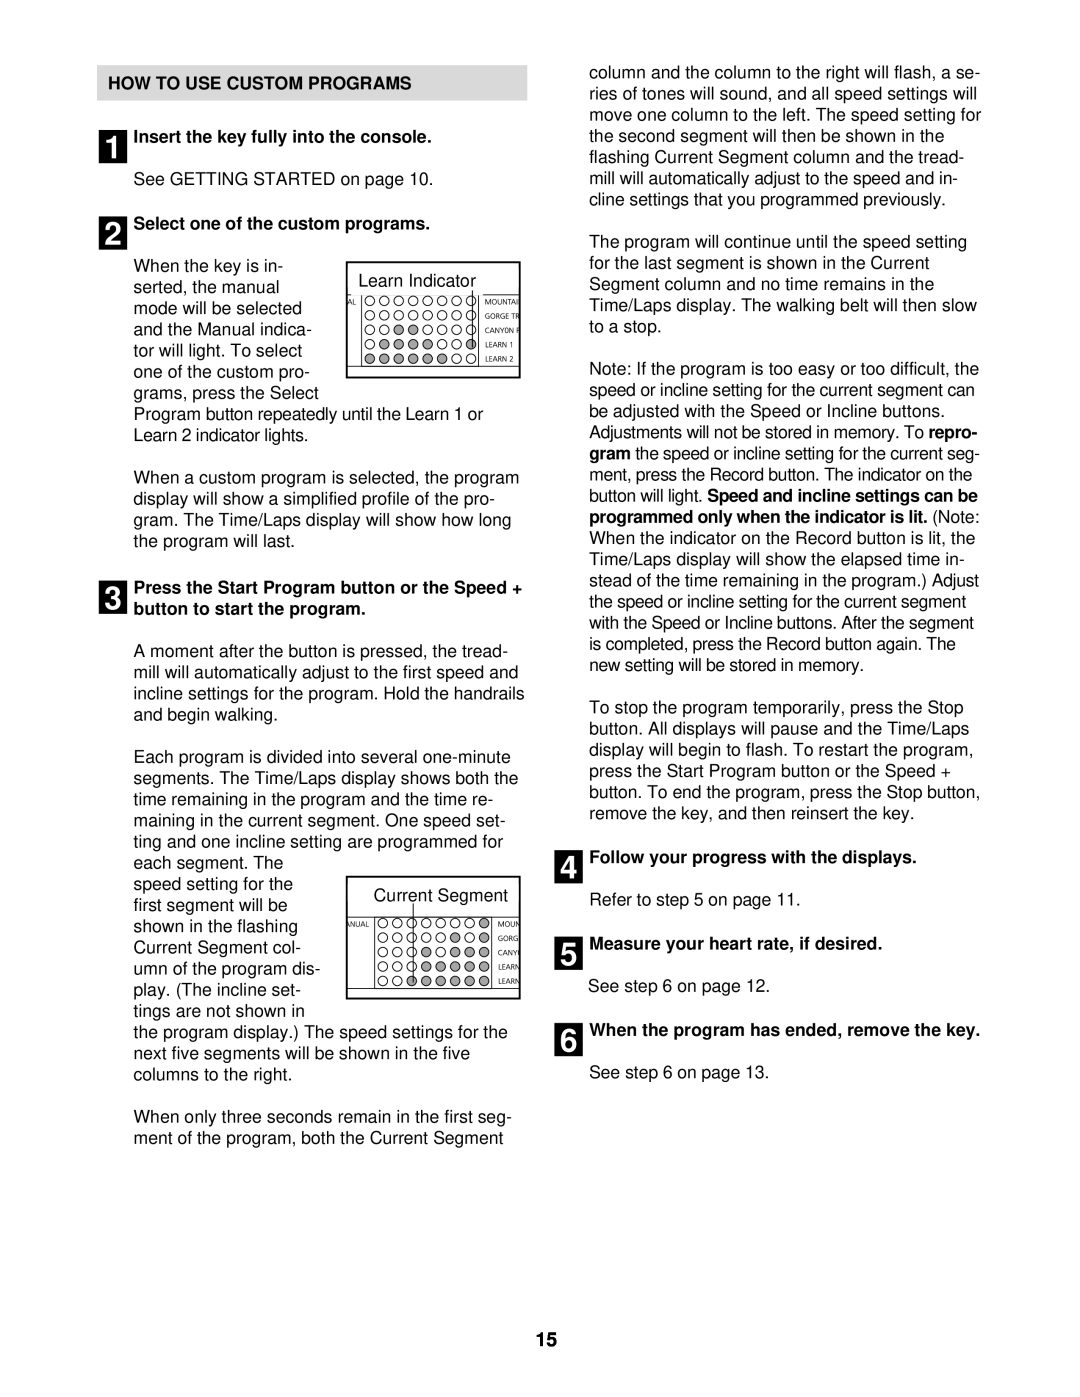 NordicTrack NTTL09610 user manual HOW TO USE CUSTOM PROGRAMS 1 Insert the key fully into the console 